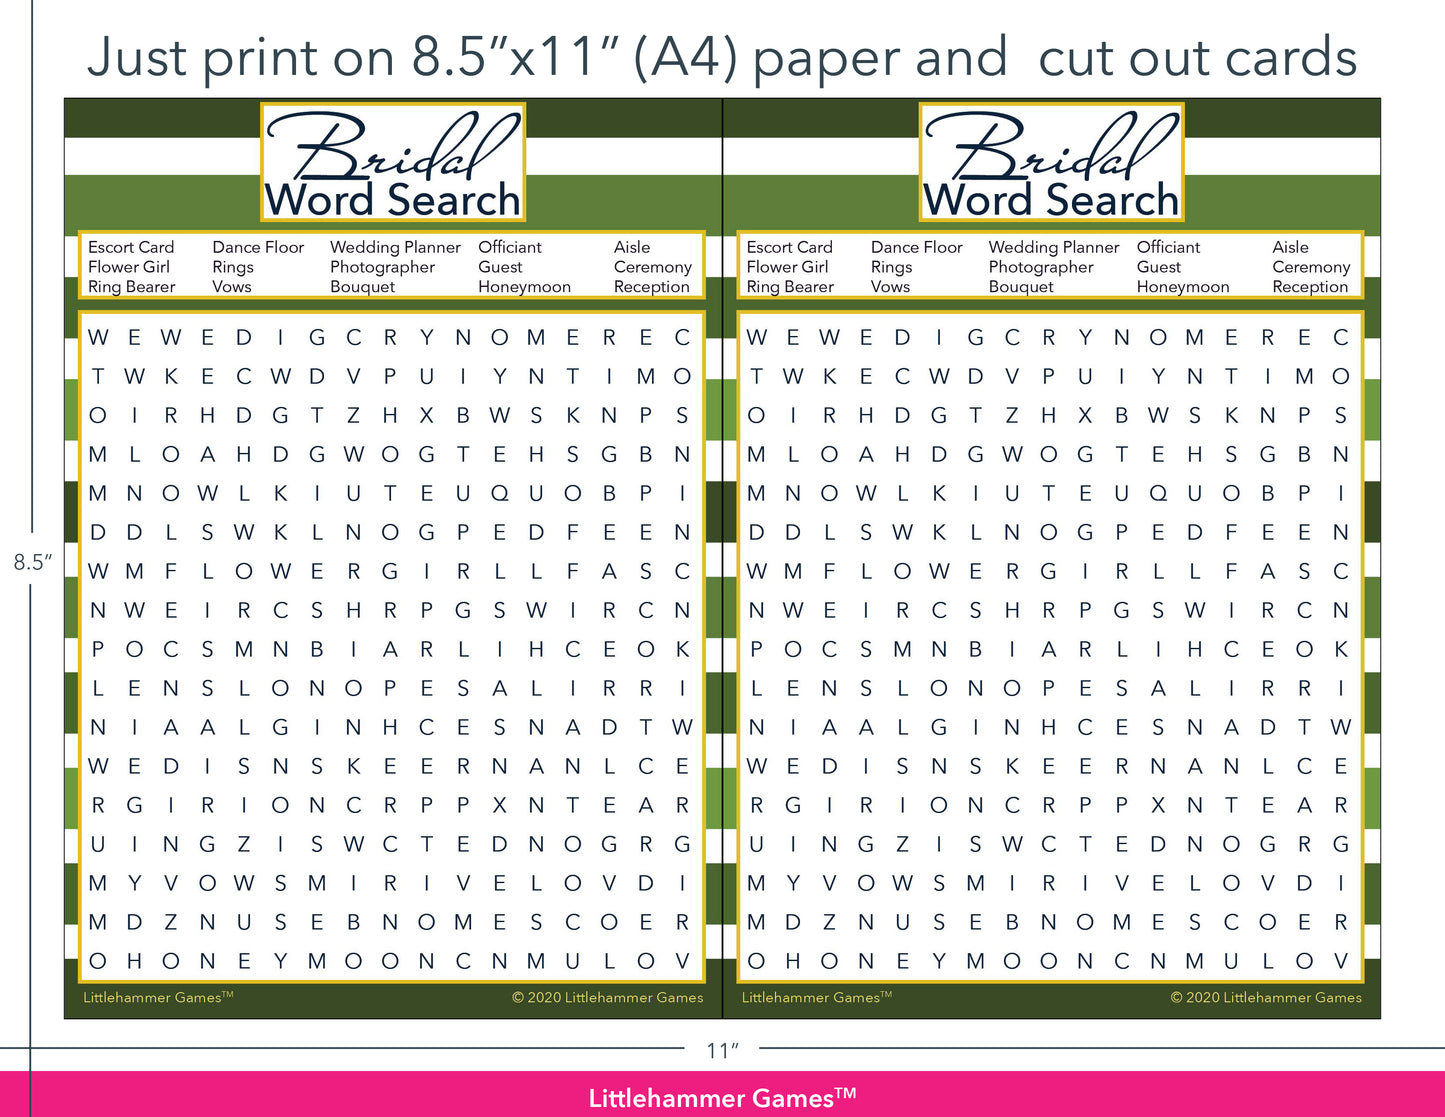 Bridal Word Search green-striped game cards with printing instructions